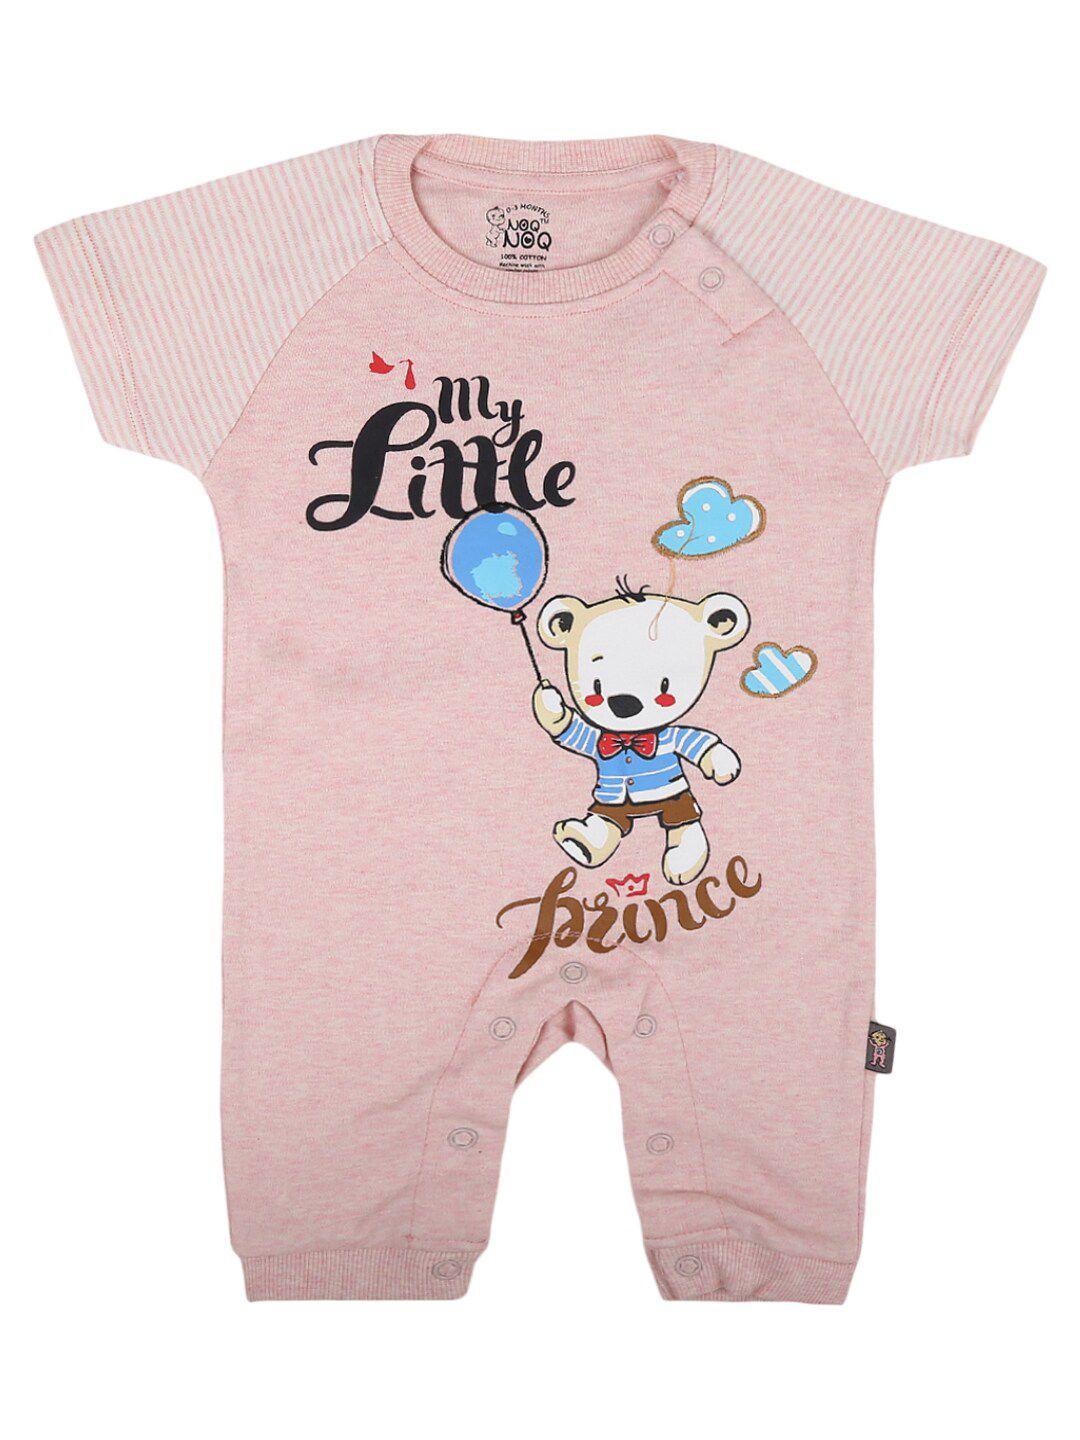 v-mart kids pink & white printed pure cotton rompers